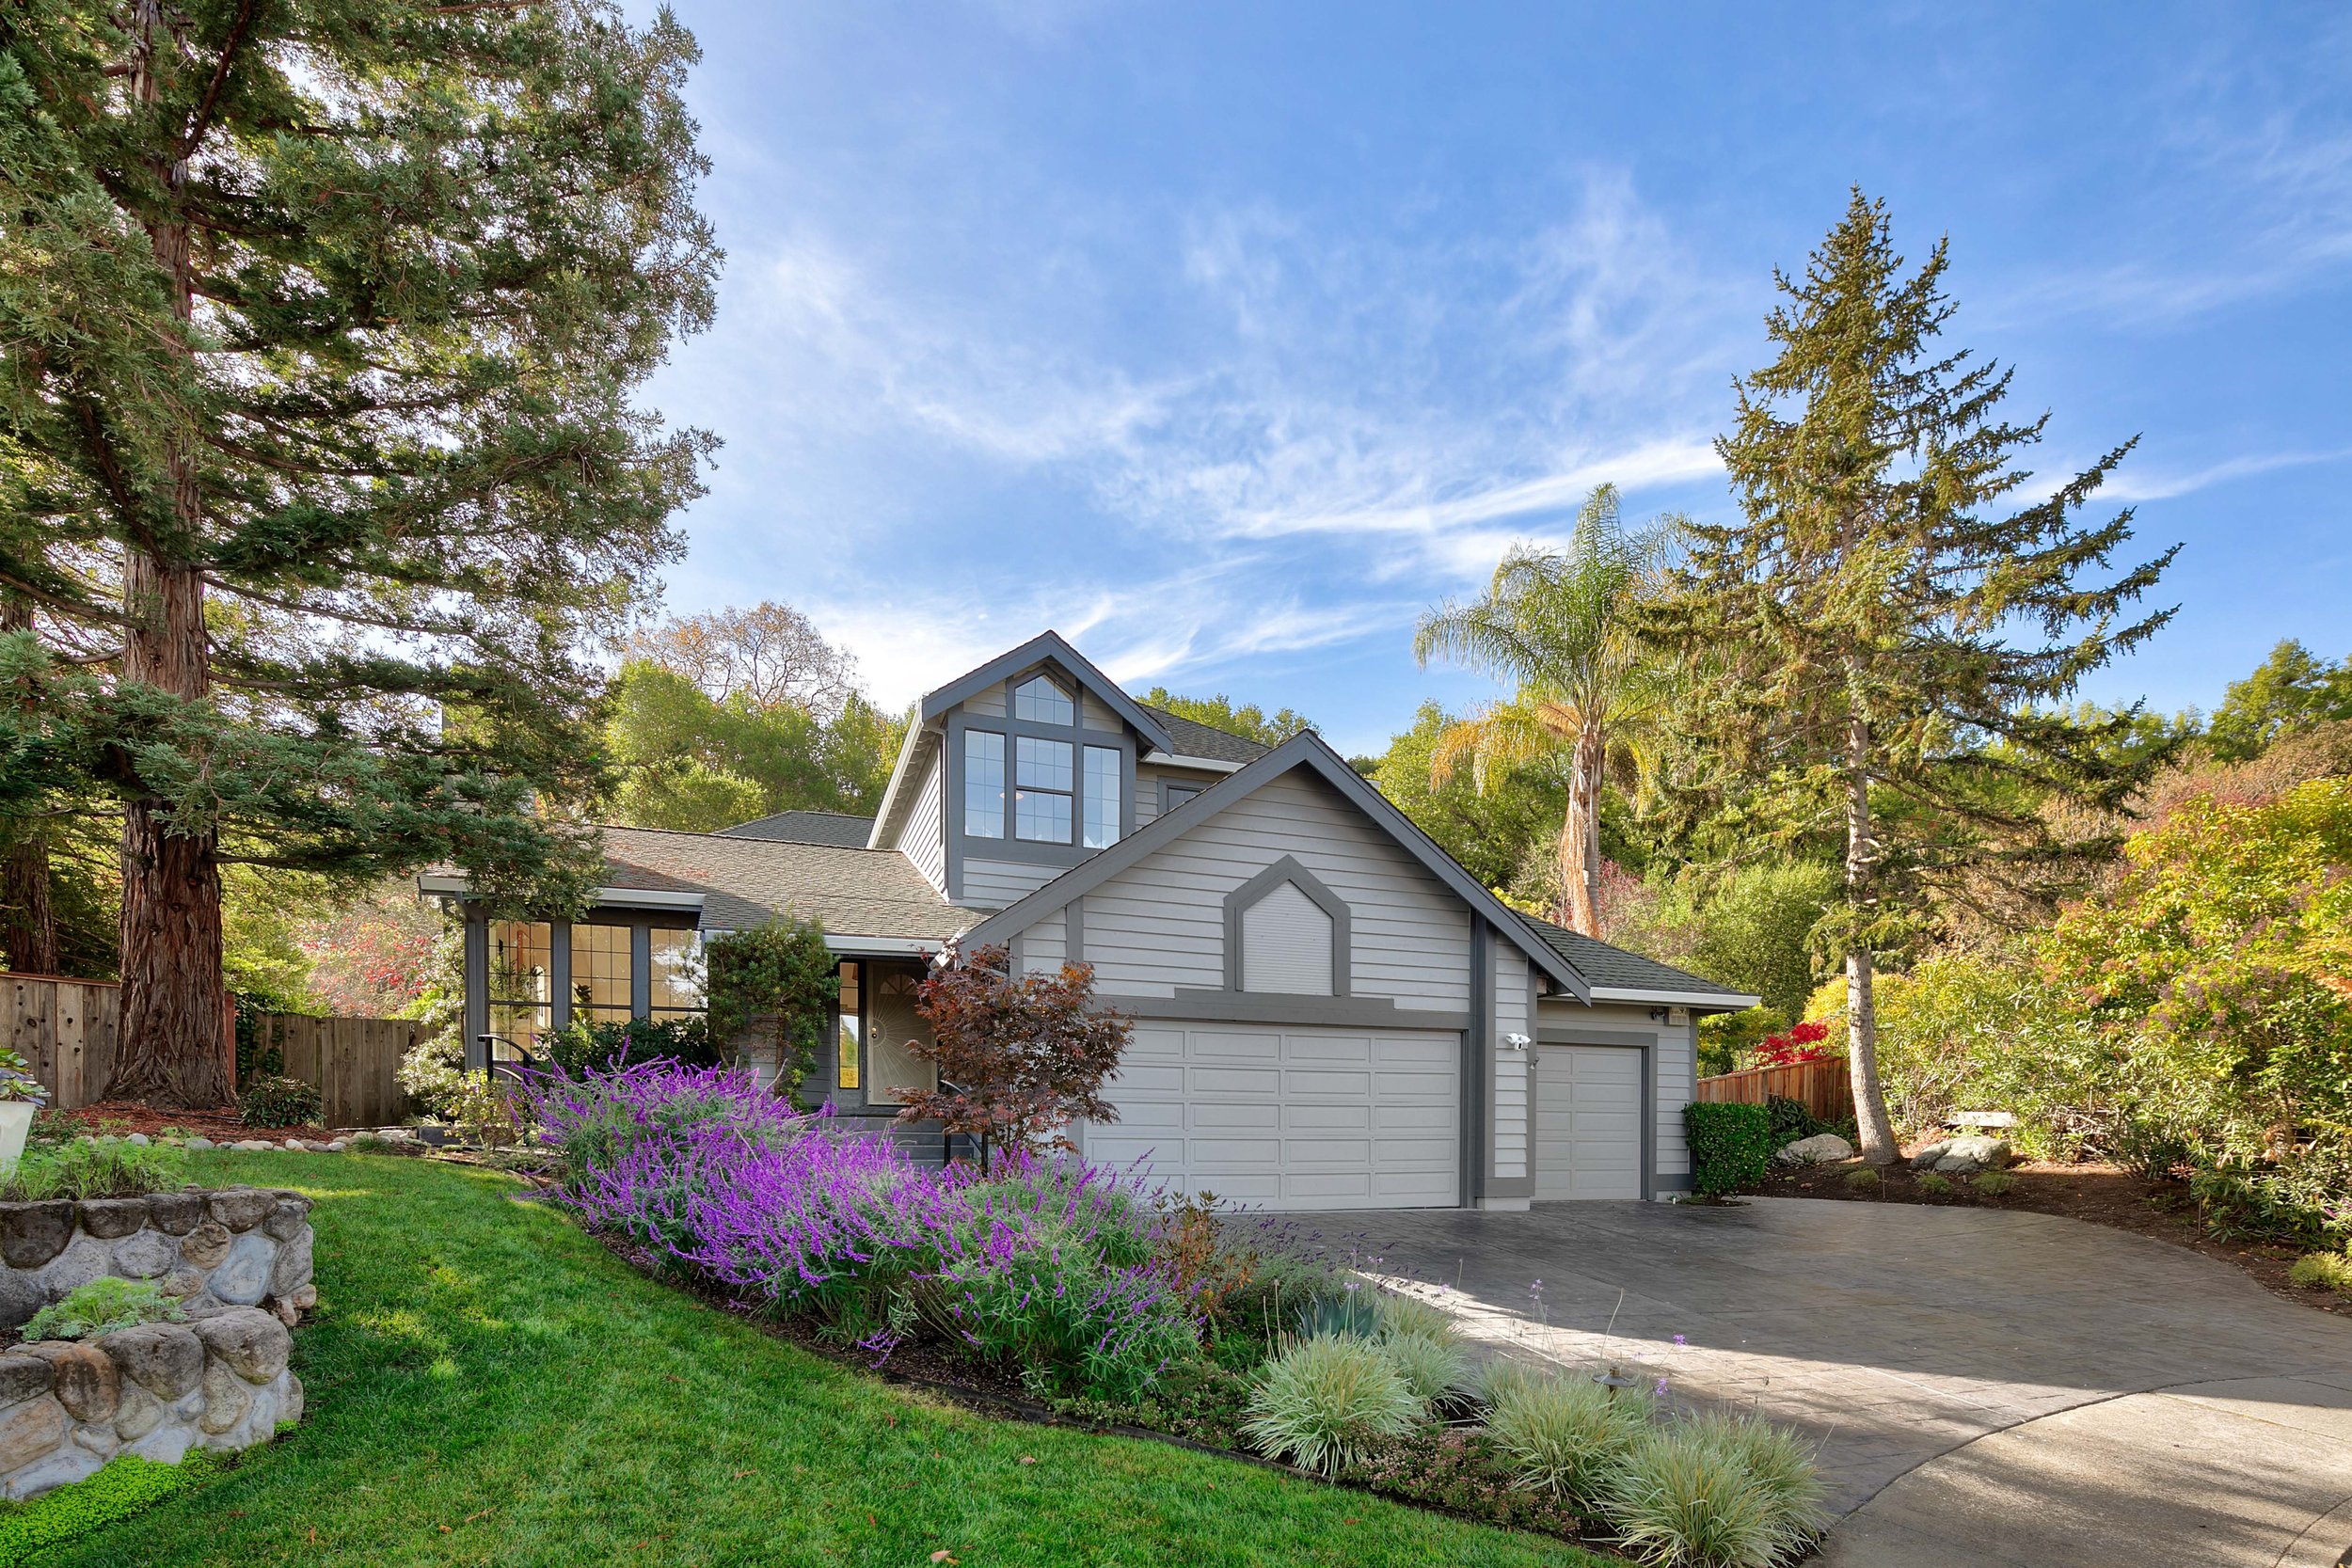 174 Butterfield Road San Anselmo Real Estate For Sale by Realtor Barr Haney at Own Marin Real Estate Agent-03.jpg